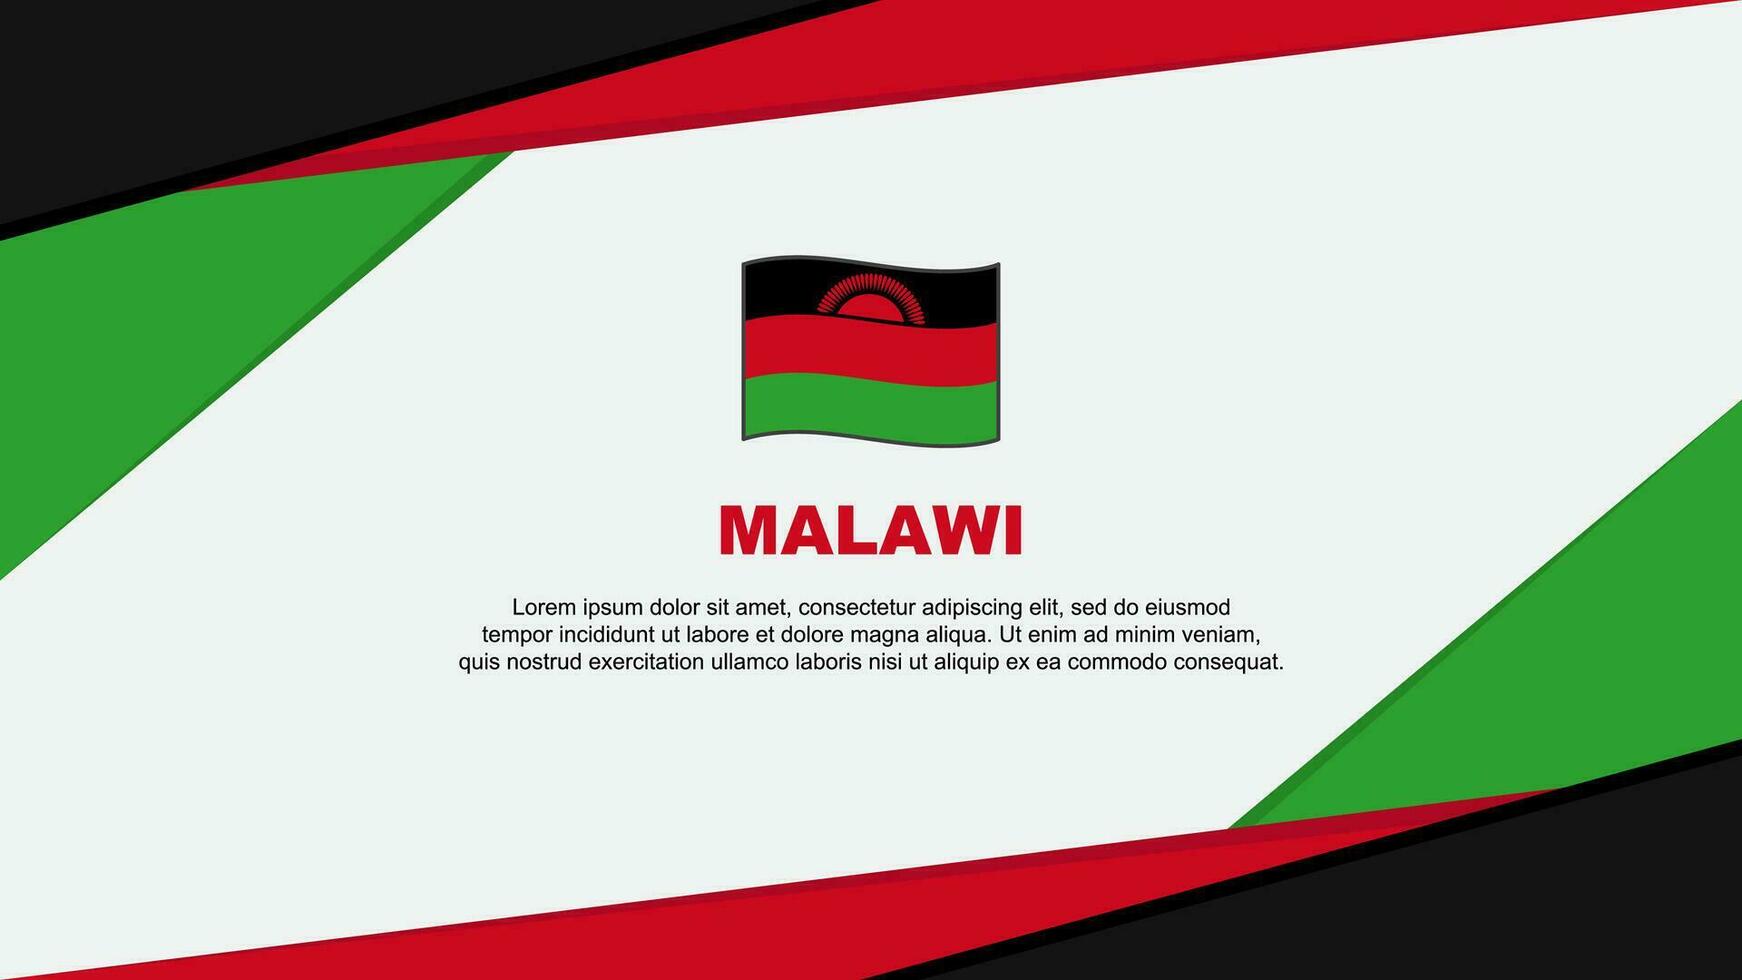 Malawi Flag Abstract Background Design Template. Malawi Independence Day Banner Cartoon Vector Illustration. Malawi